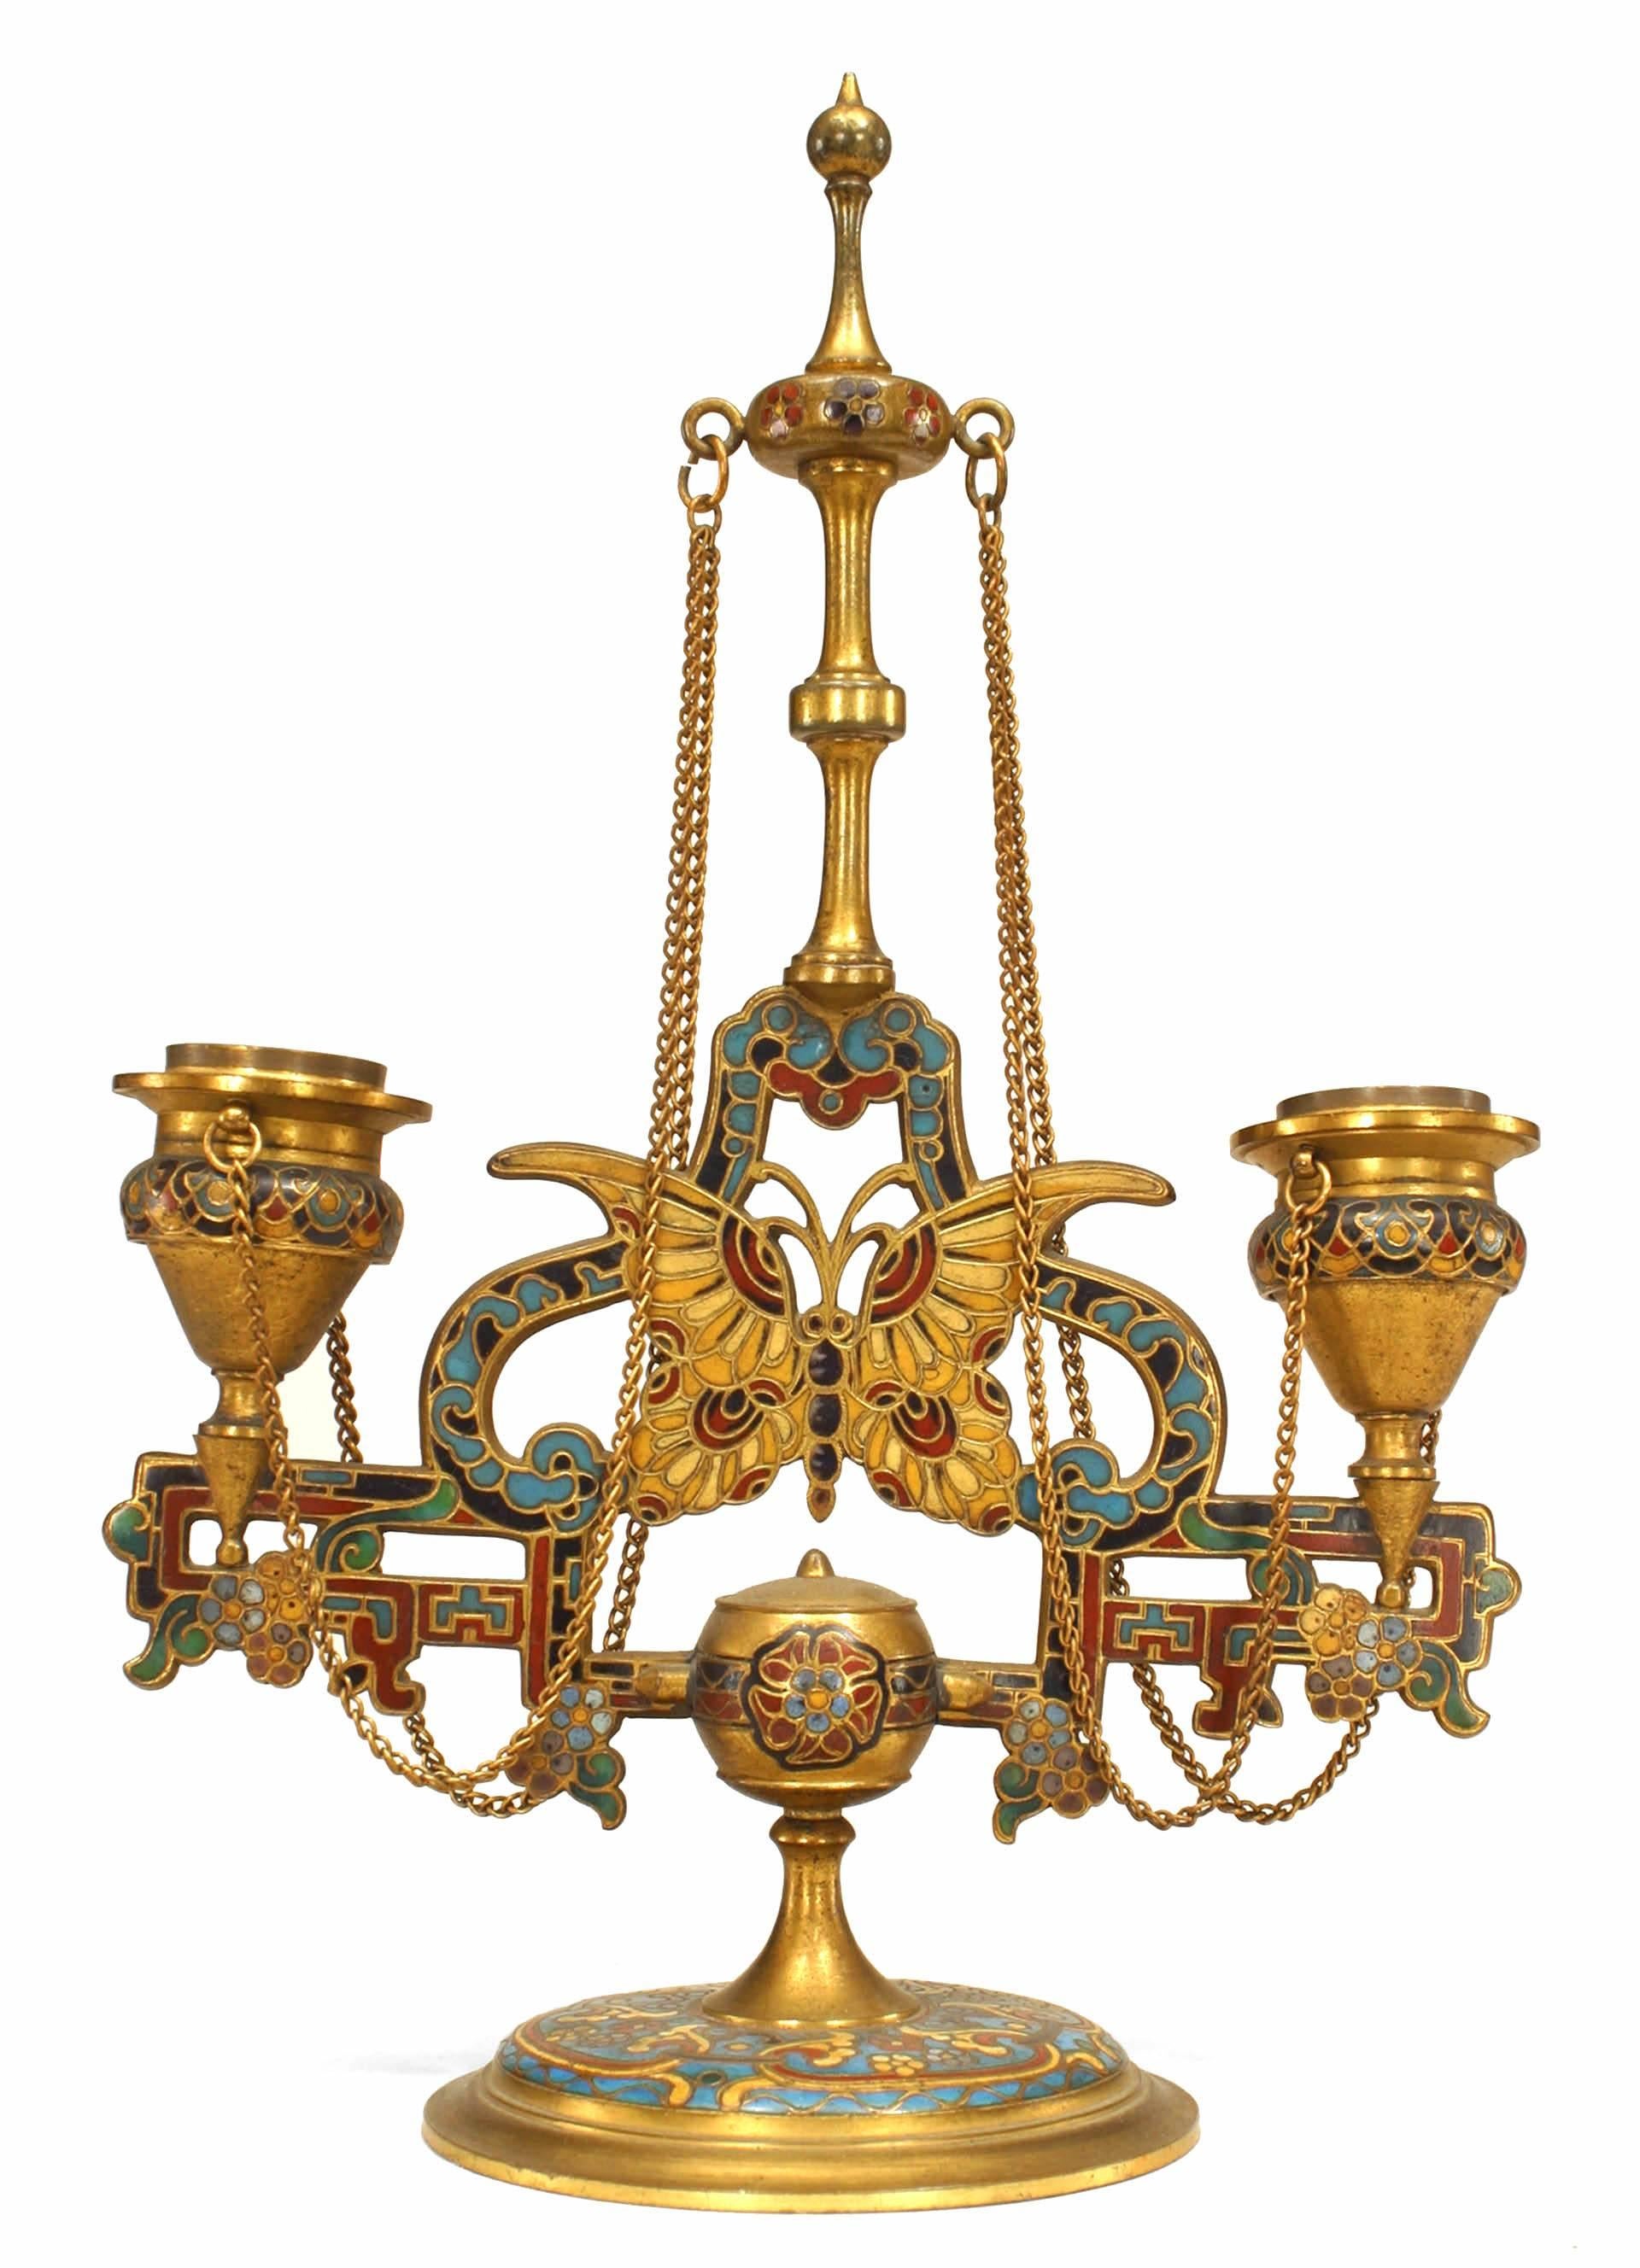 Pair of French Victorian bronze dore and enamel double arm candelabras with butterfly design (signed F. BARBEDIENNE) (PRICED AS Pair)
